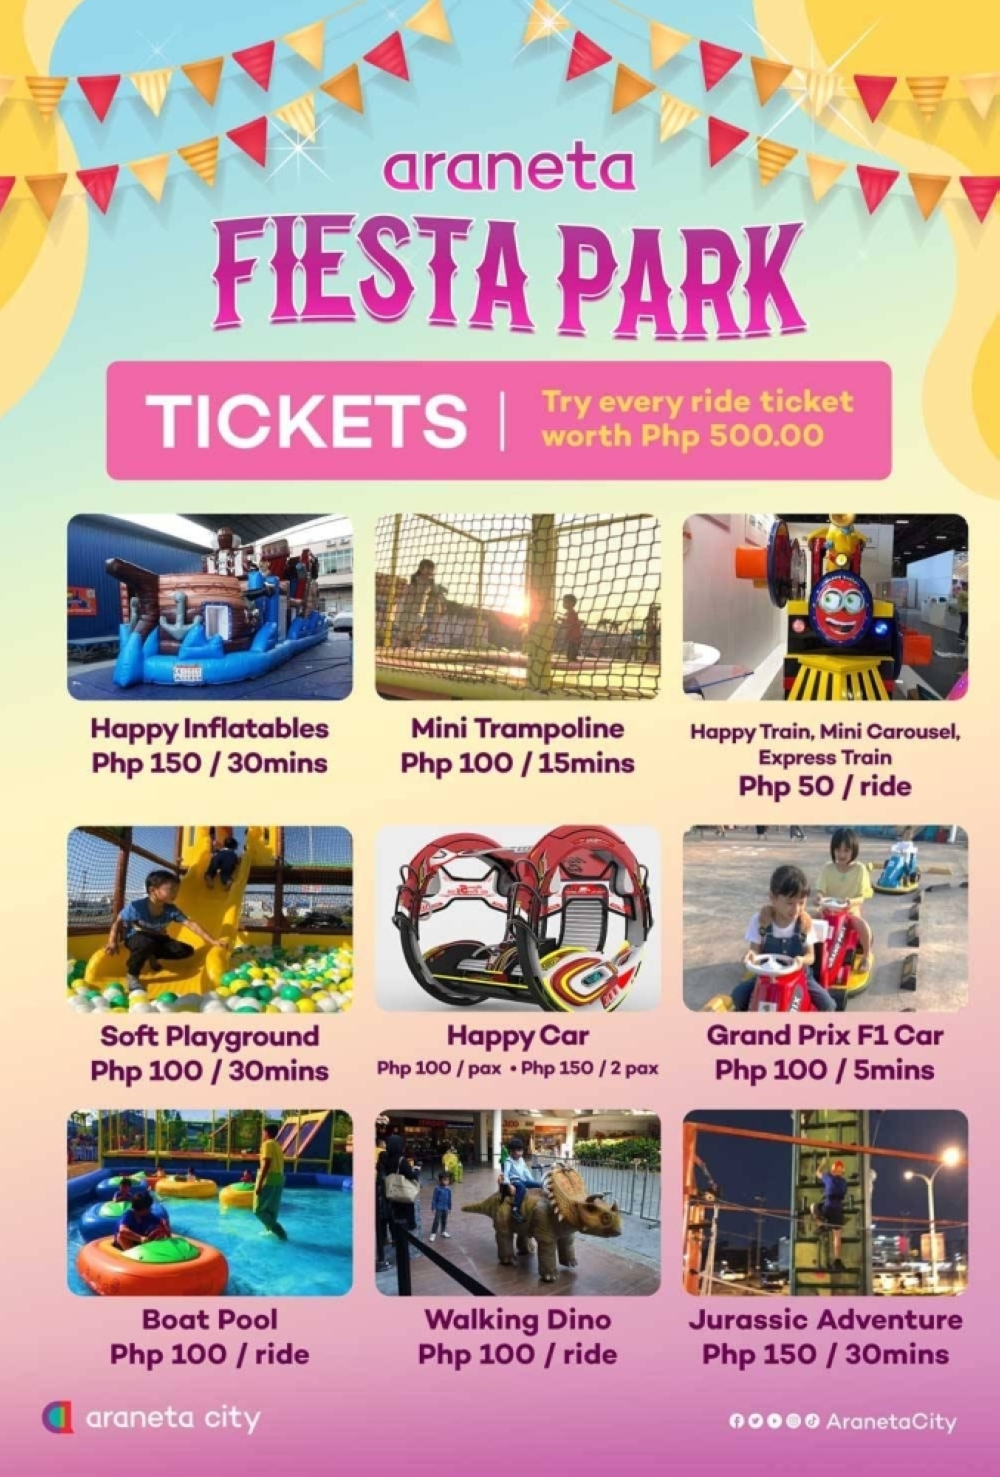 Araneta Fiesta Park for young adventurers, they can ride the cool kiddie F1 Cars or the prehistoric dinosaurs in Jurassic Adventures. For some laid-back fun, kiddos can try the Boat Pool ride. There’s also the mini trampoline, soft playground, and happy inflatables for a fun and bouncy playtime. CONTRIBUTED PHOTO